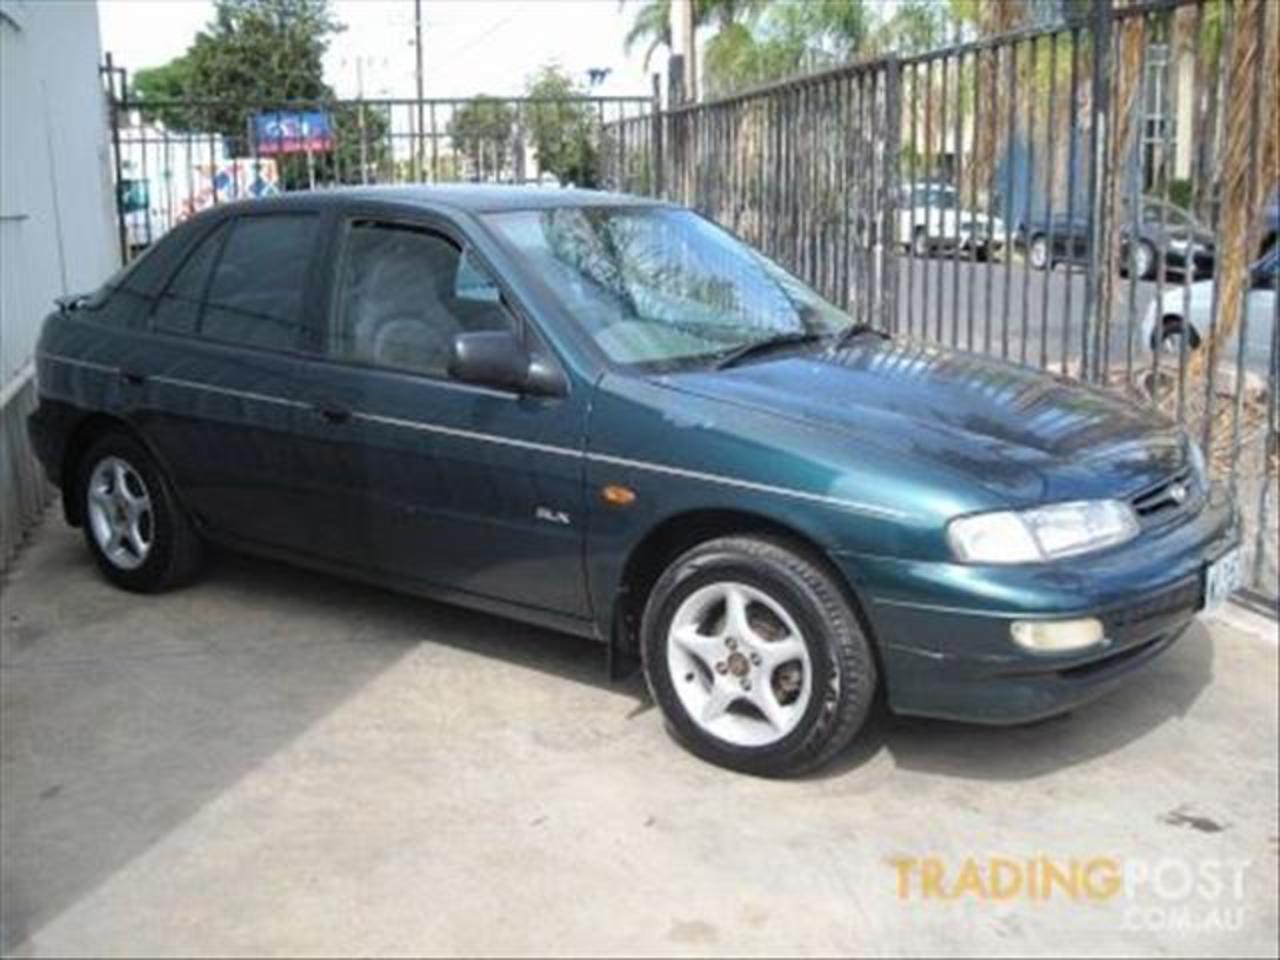 Used 1997 KIA MENTOR GLX 5D HATCHBACK for sale in Adelaide | Best ...